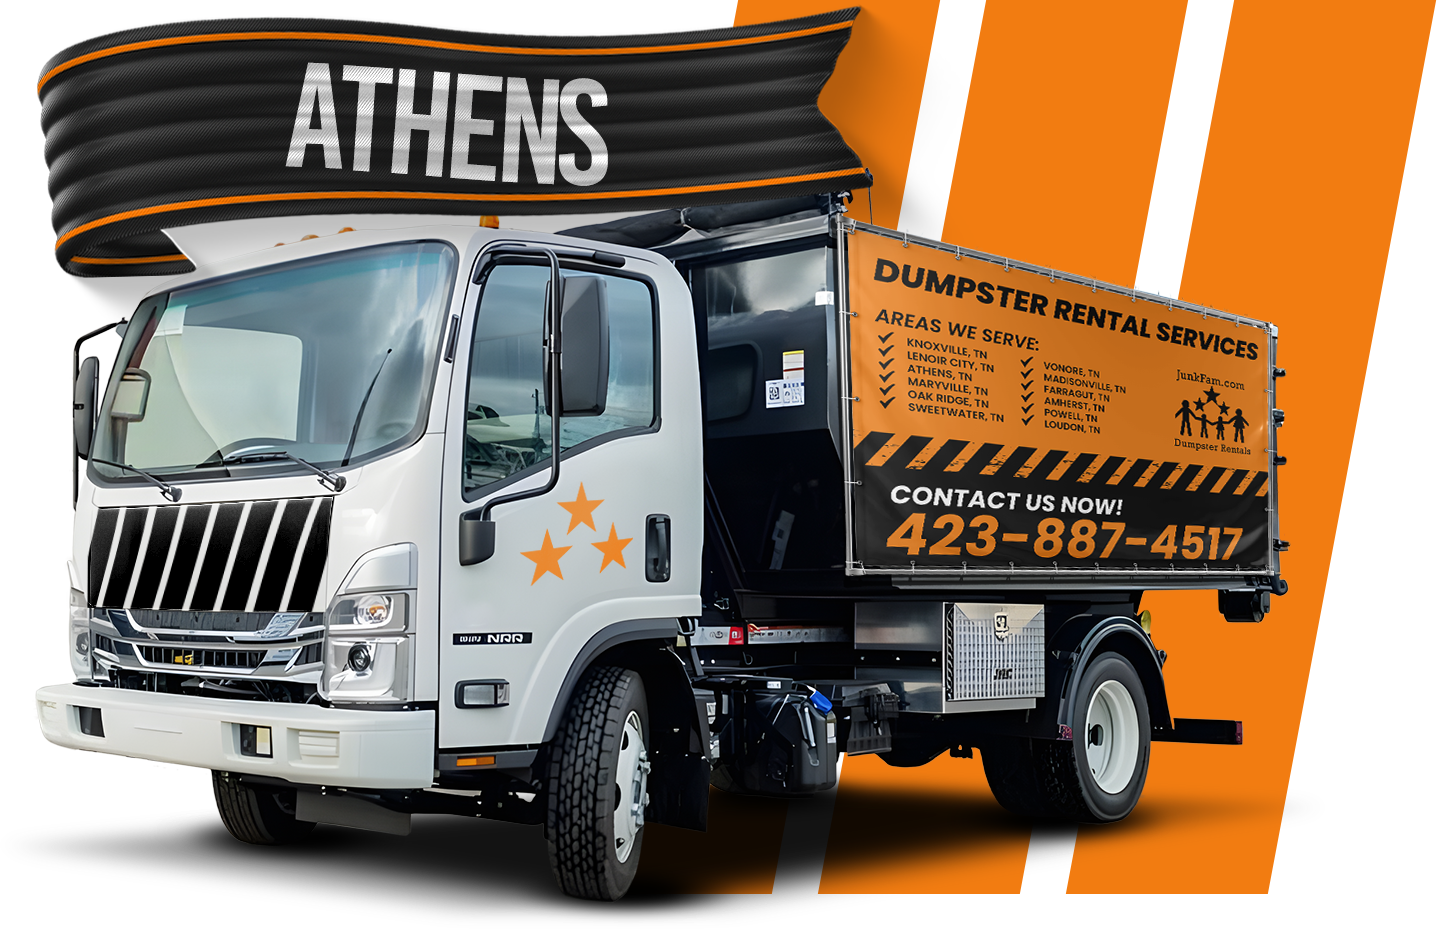 A dumpster truck is parked in front of a sign that says Athens.